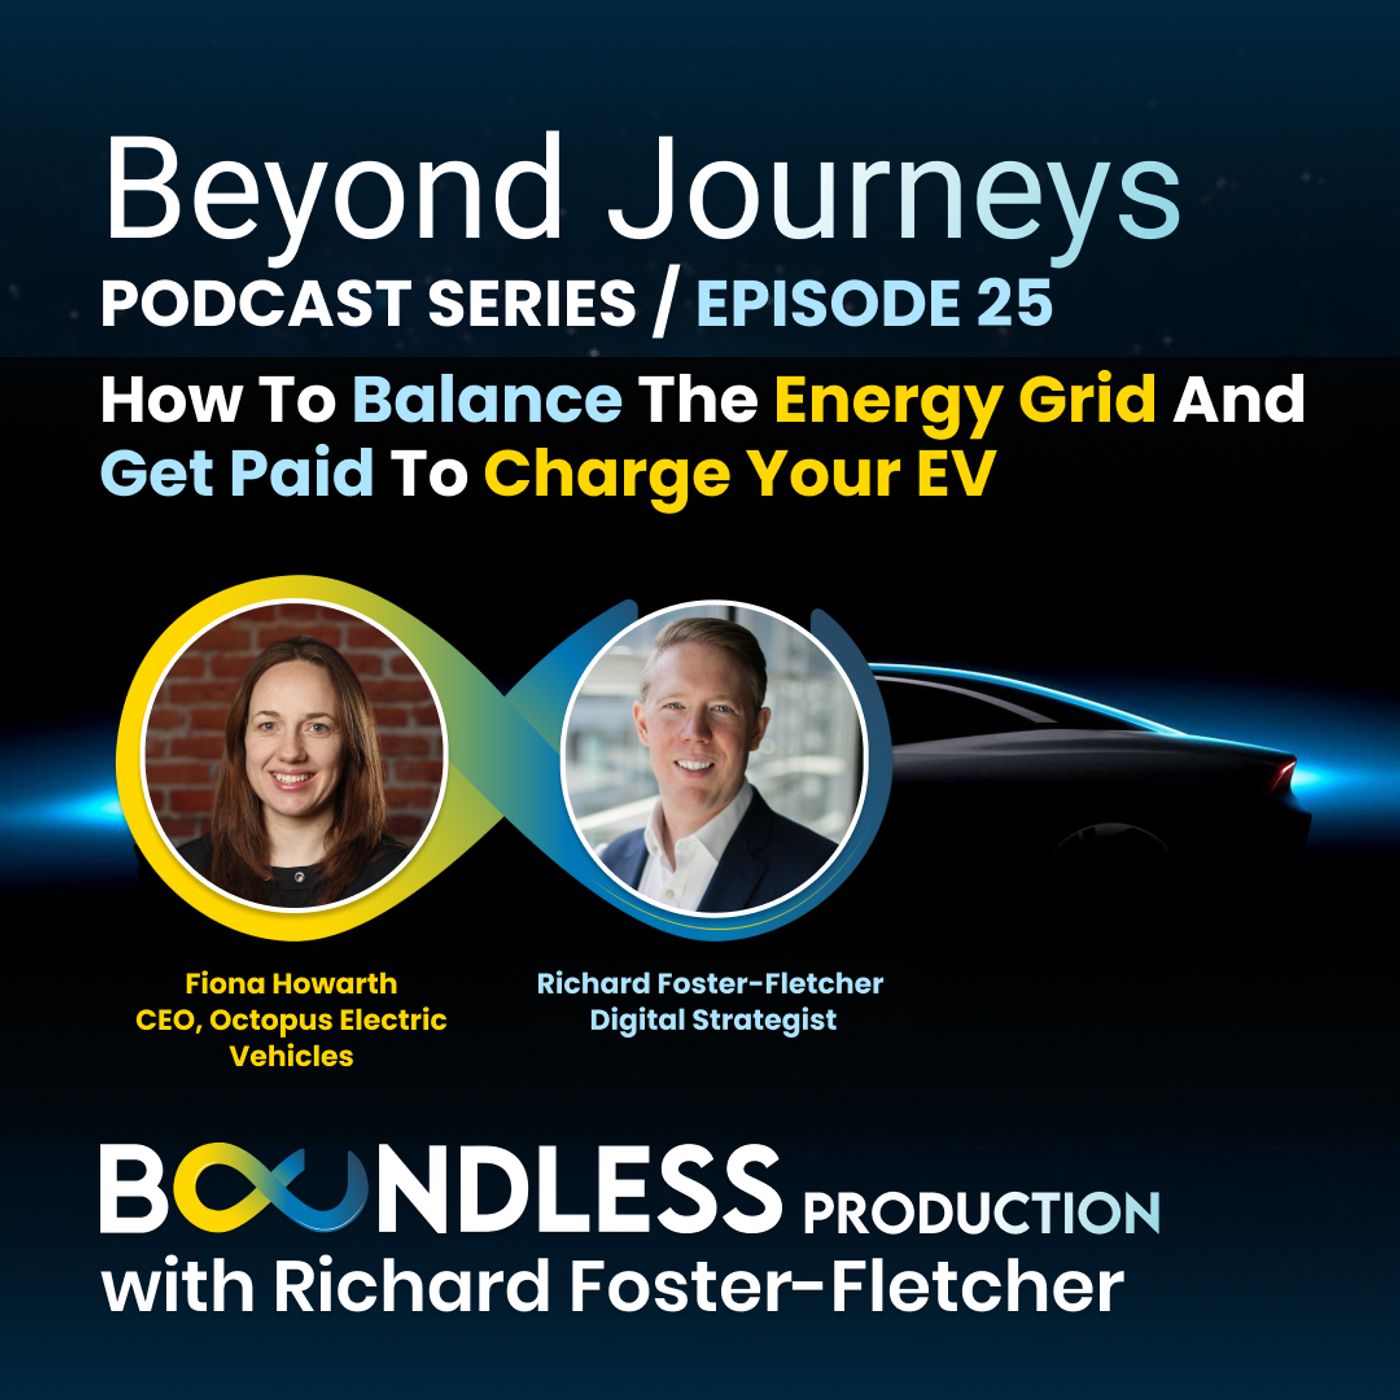 EP25 Beyond Journeys: Fiona Howarth, CEO, Octopus Electric Vehicles: How to balance the energy grid and get paid to charge your EV